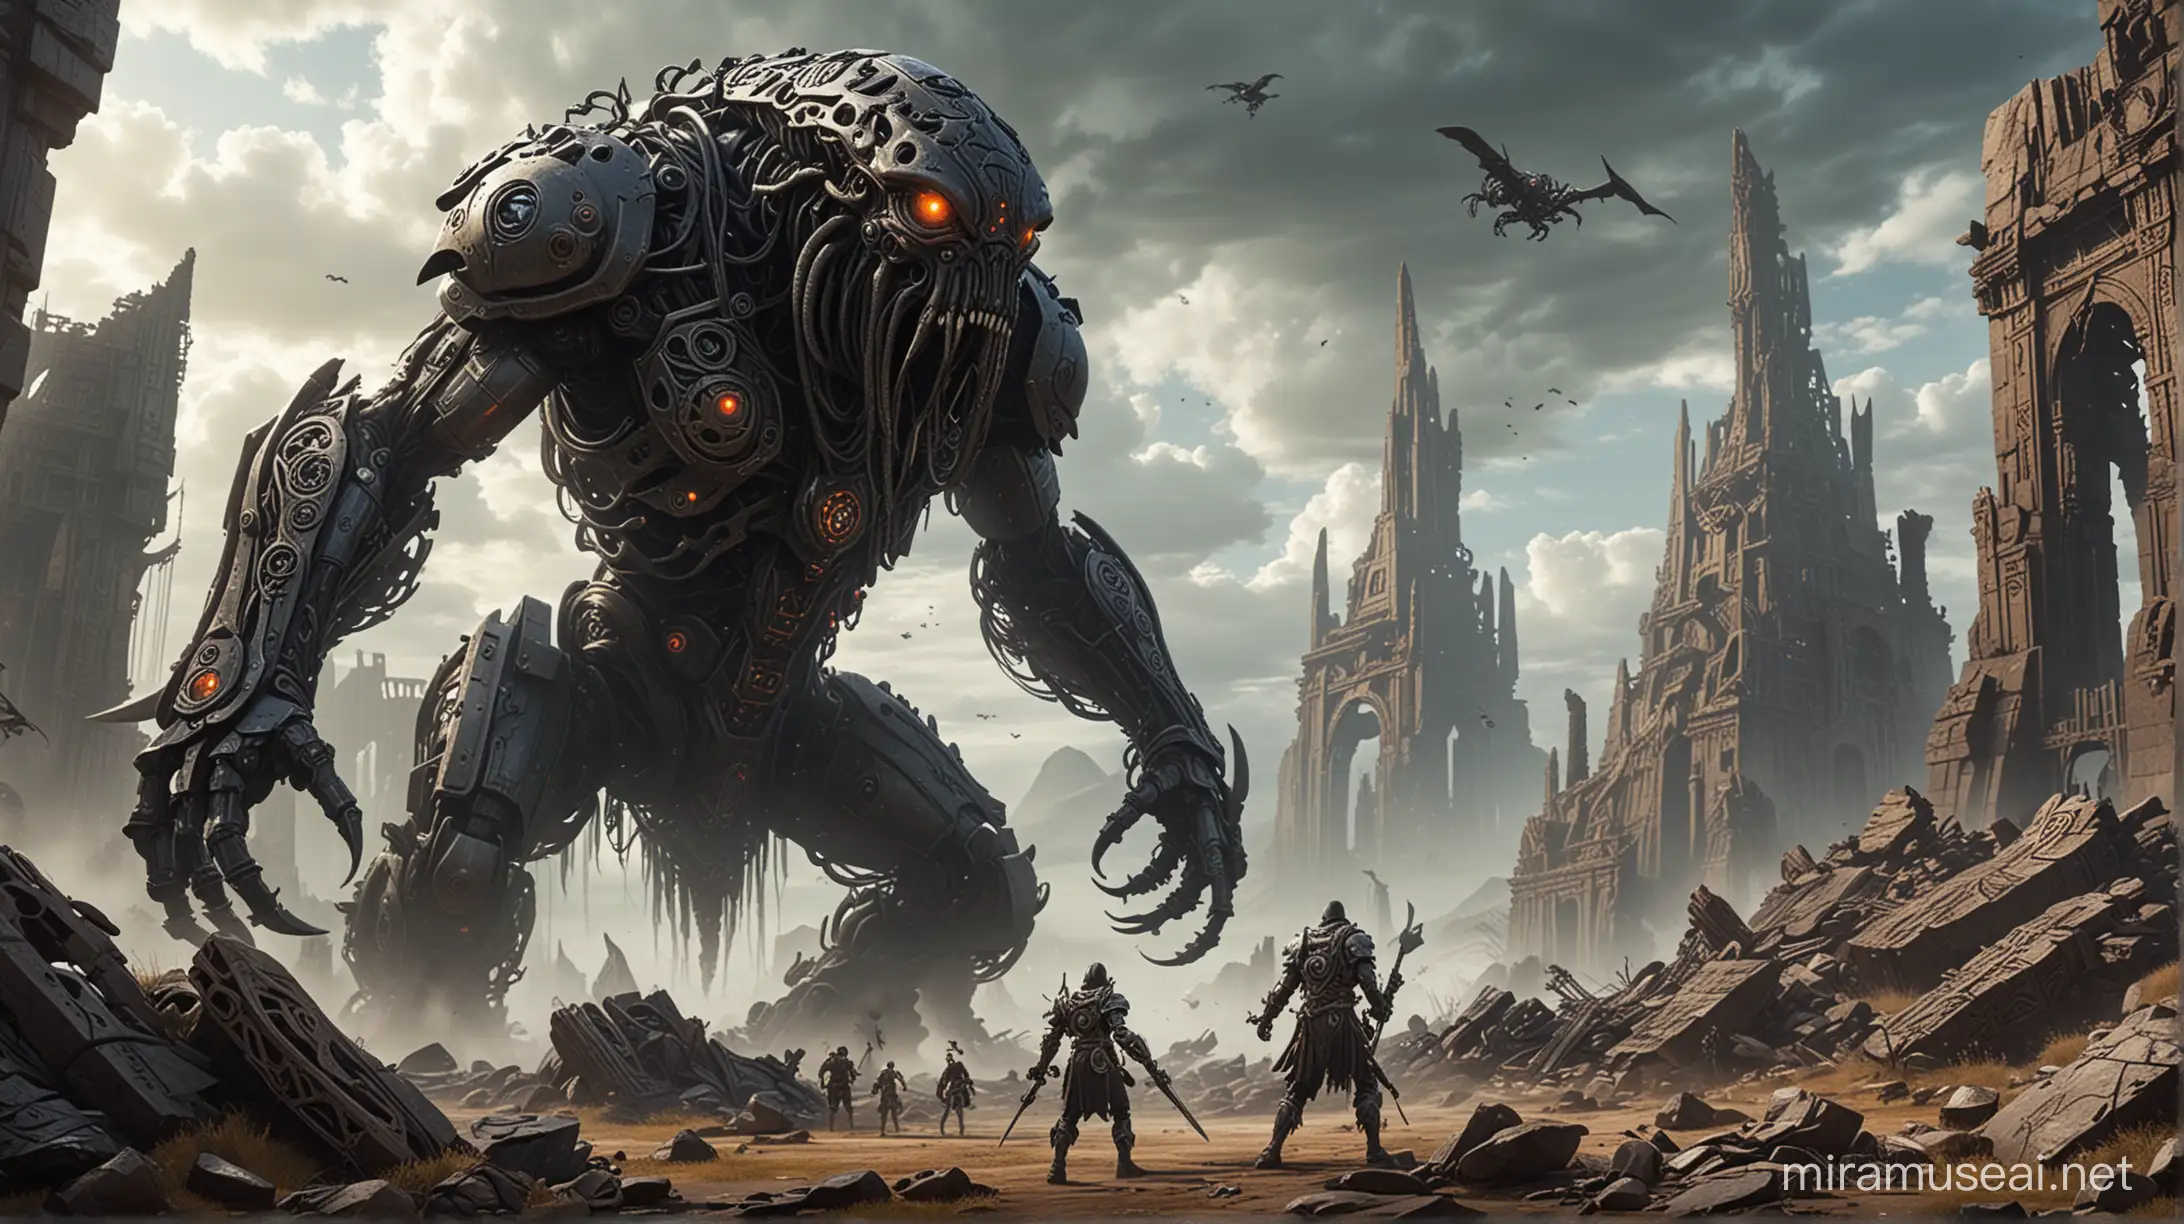 A giant lovecratian monster, black tentacles, battling a giant alien robot in front of ancient alien metal ruins with norse runes on them, bleak.